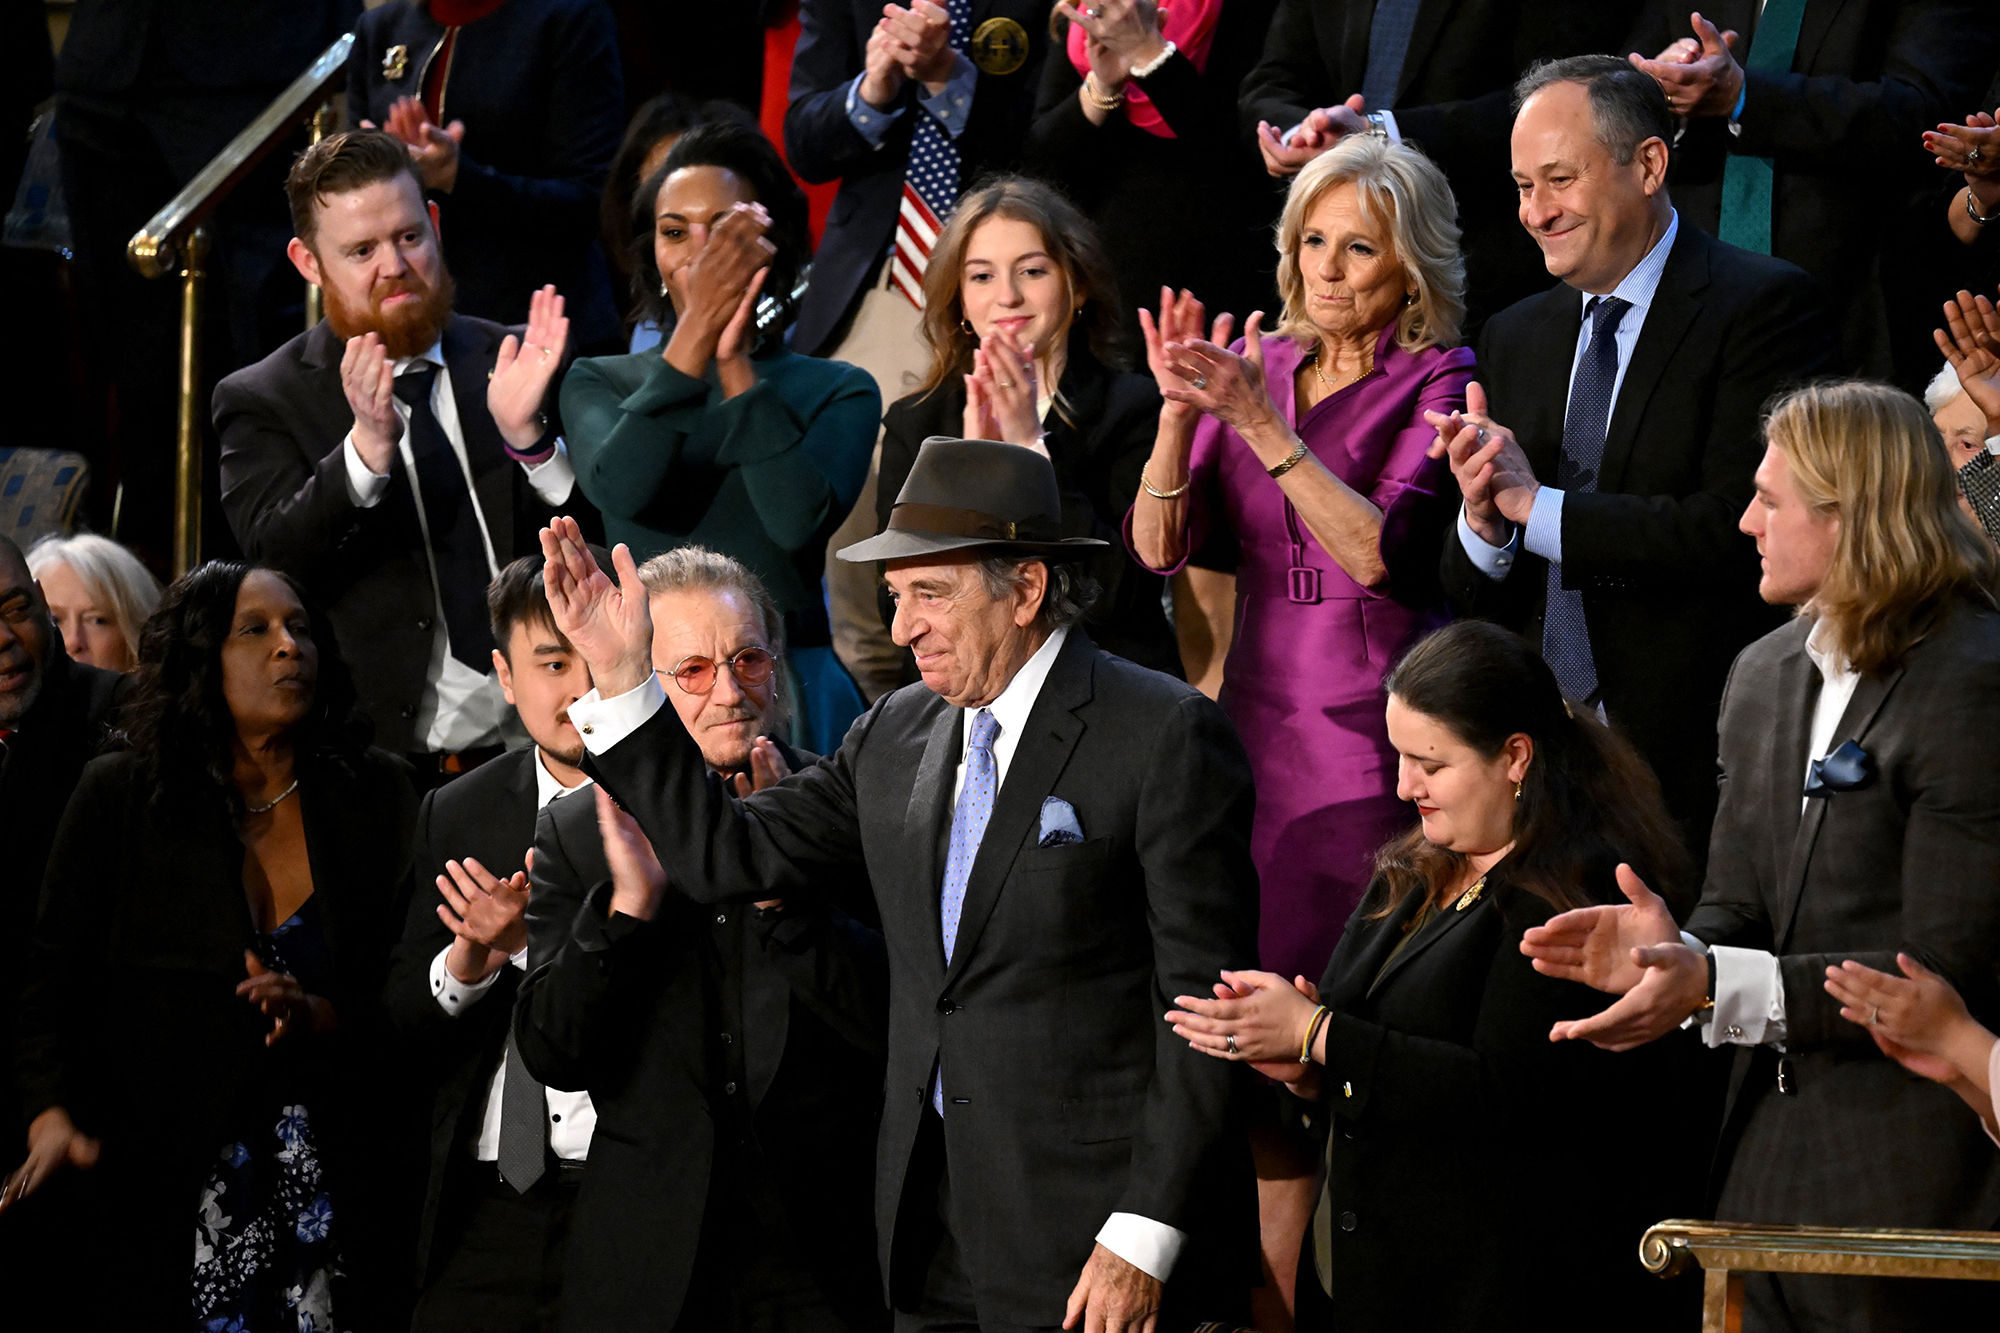 Attendees, including US First Lady Jill Biden and US Second Gentleman Doug Emhoff, applaud Paul Pelosi, husband of US Representative Nancy Pelosi as President Joe Biden delivers the State of the Union address.